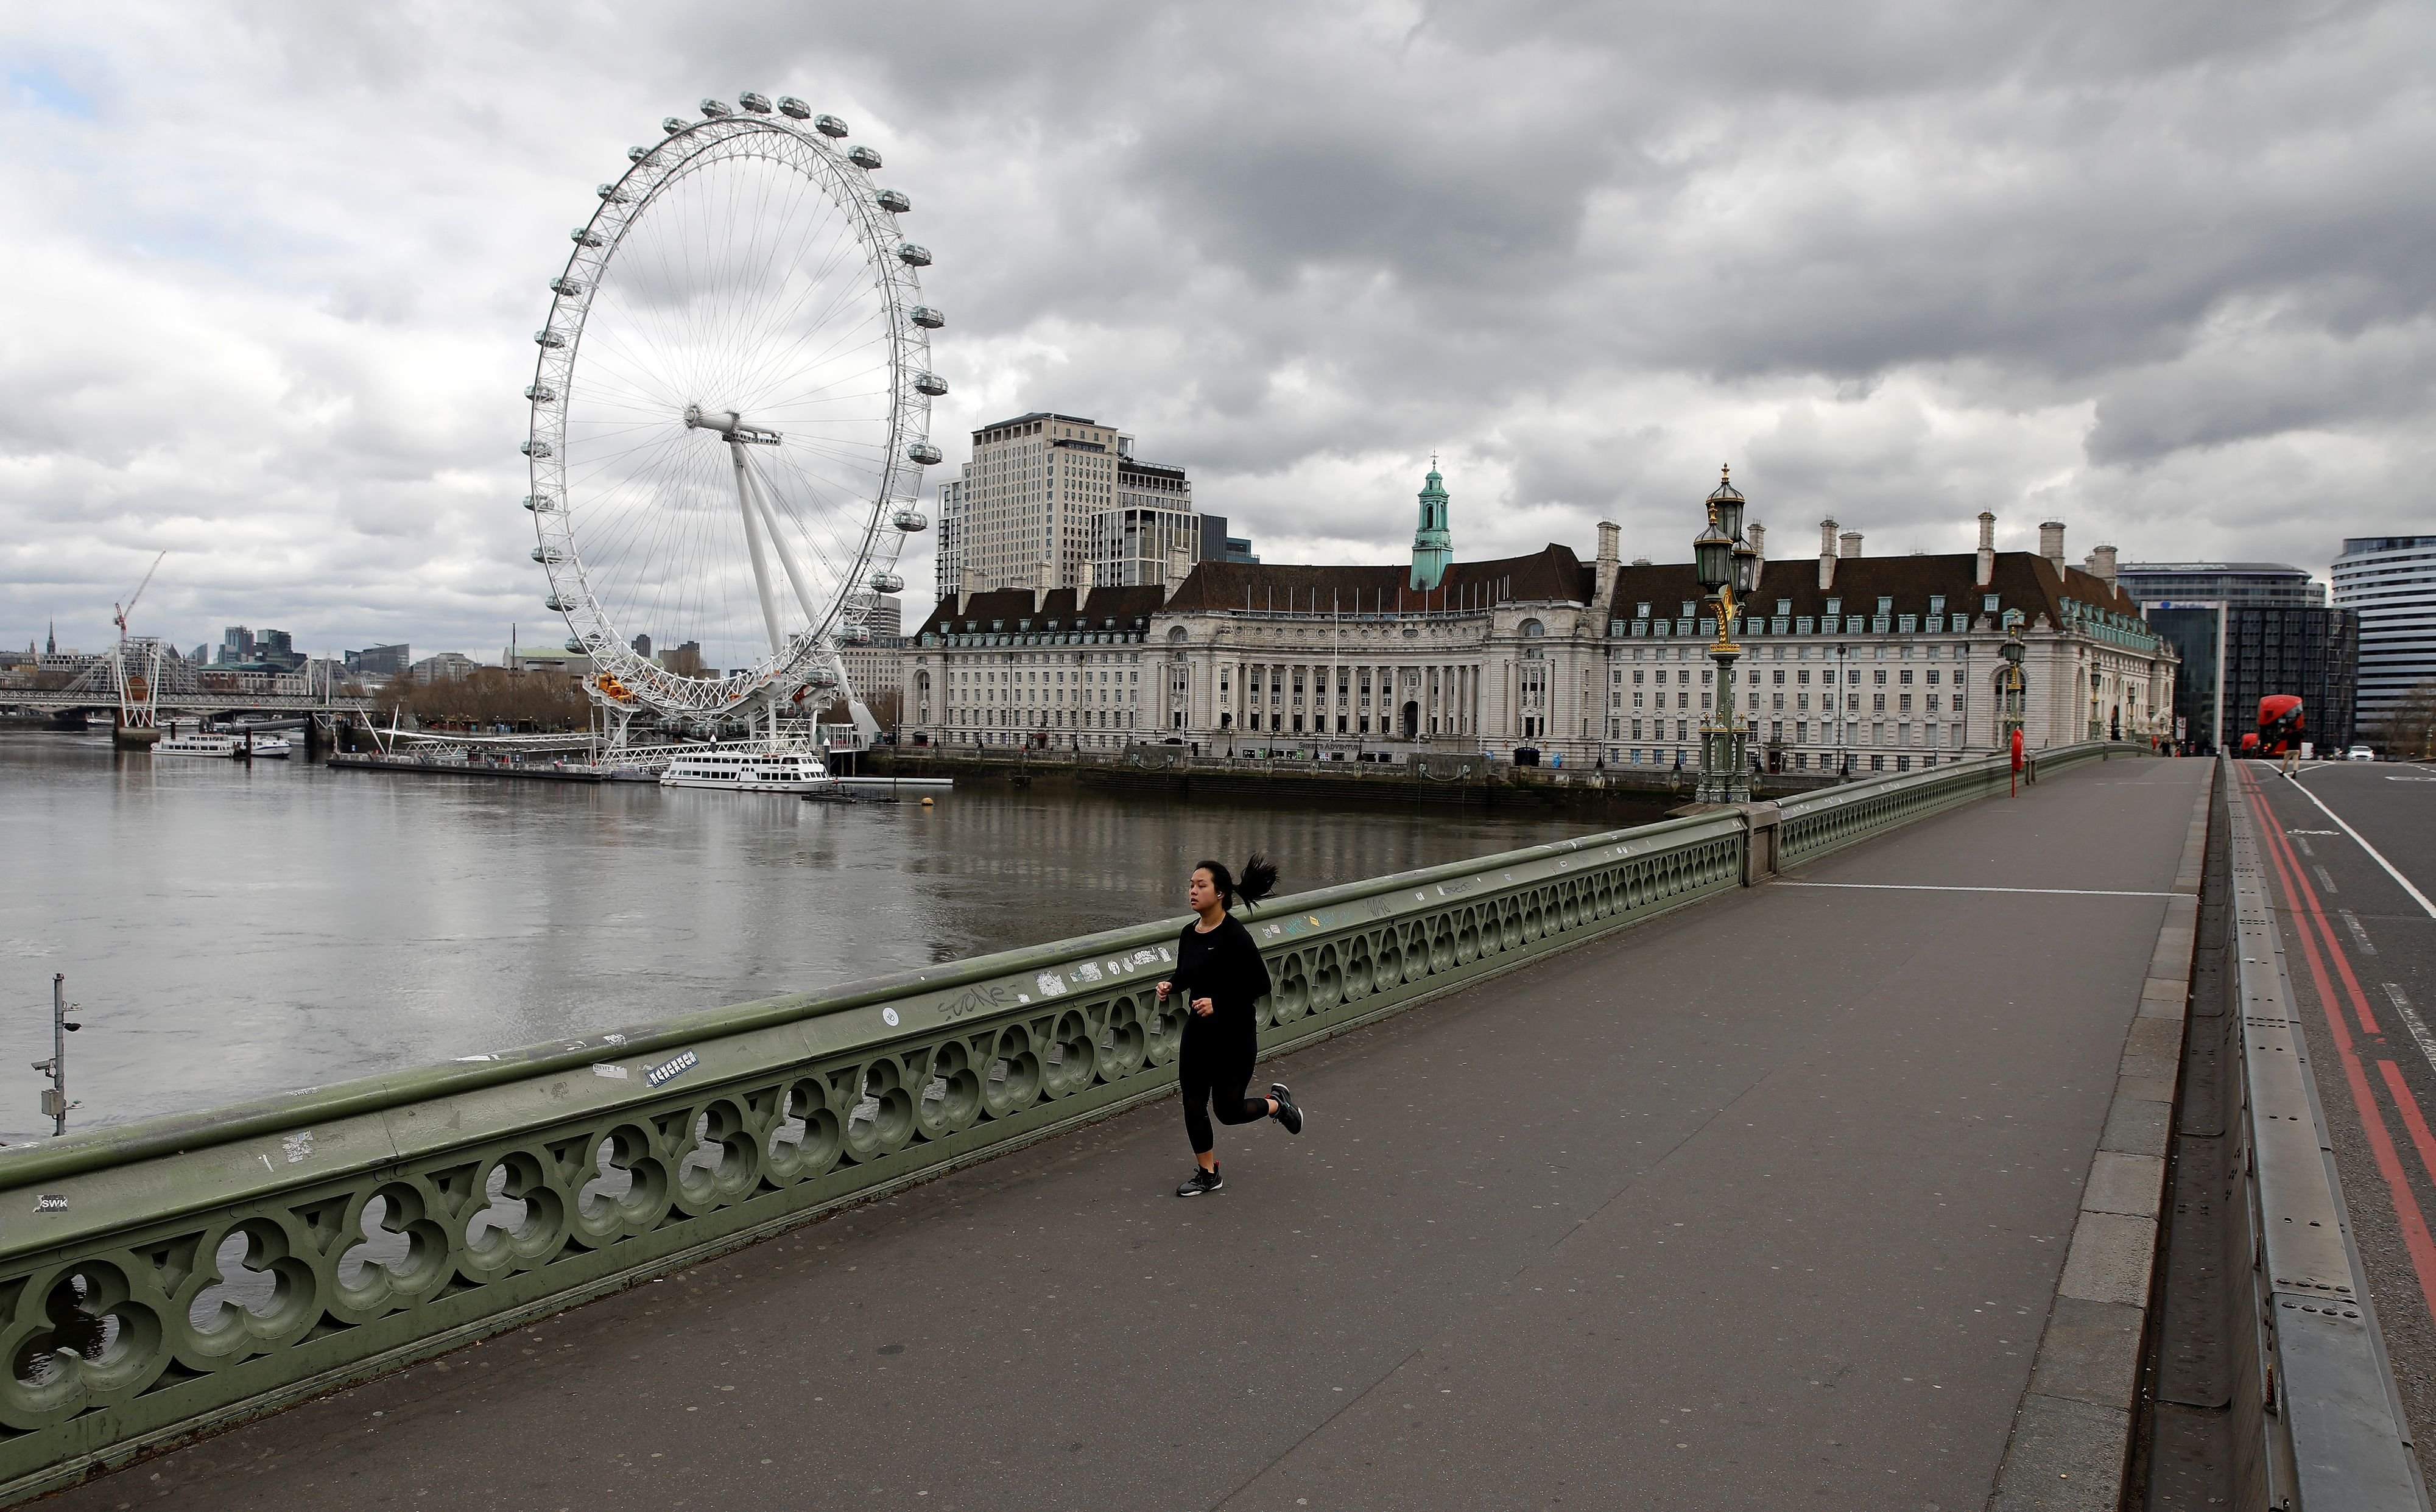 A woman wearing a face mask jogs across Westminster Bridge in London on Thursday, April 2, 2020, as life in Britain continues during the nationwide lockdown to combat the COVID-19 pandemic. (AFP Photo)